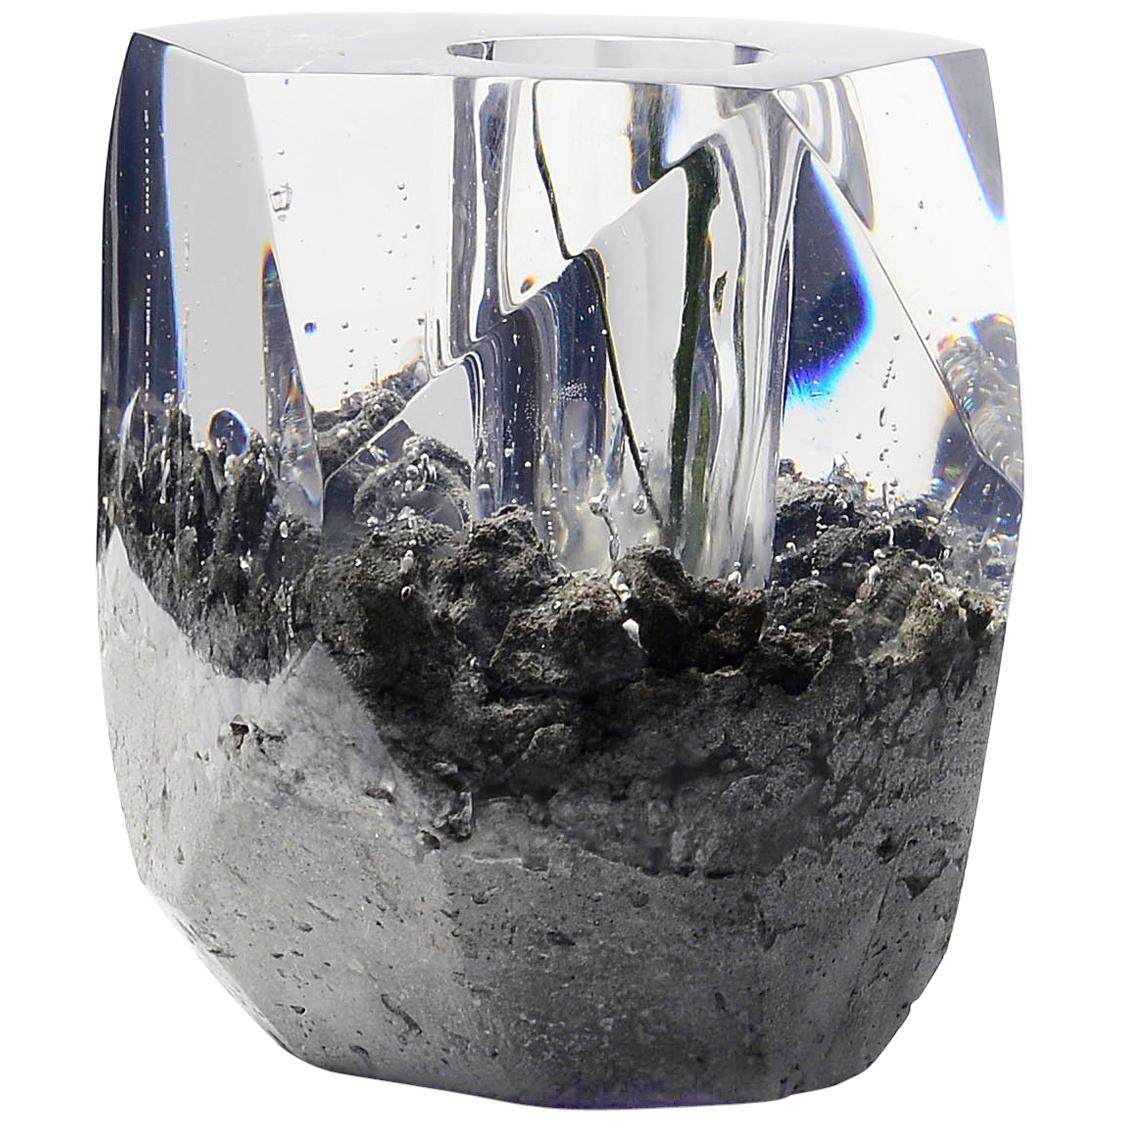 Unique Contemporary 'In Disguise' Vase by Jule Cats, Model 'Rock' im Angebot